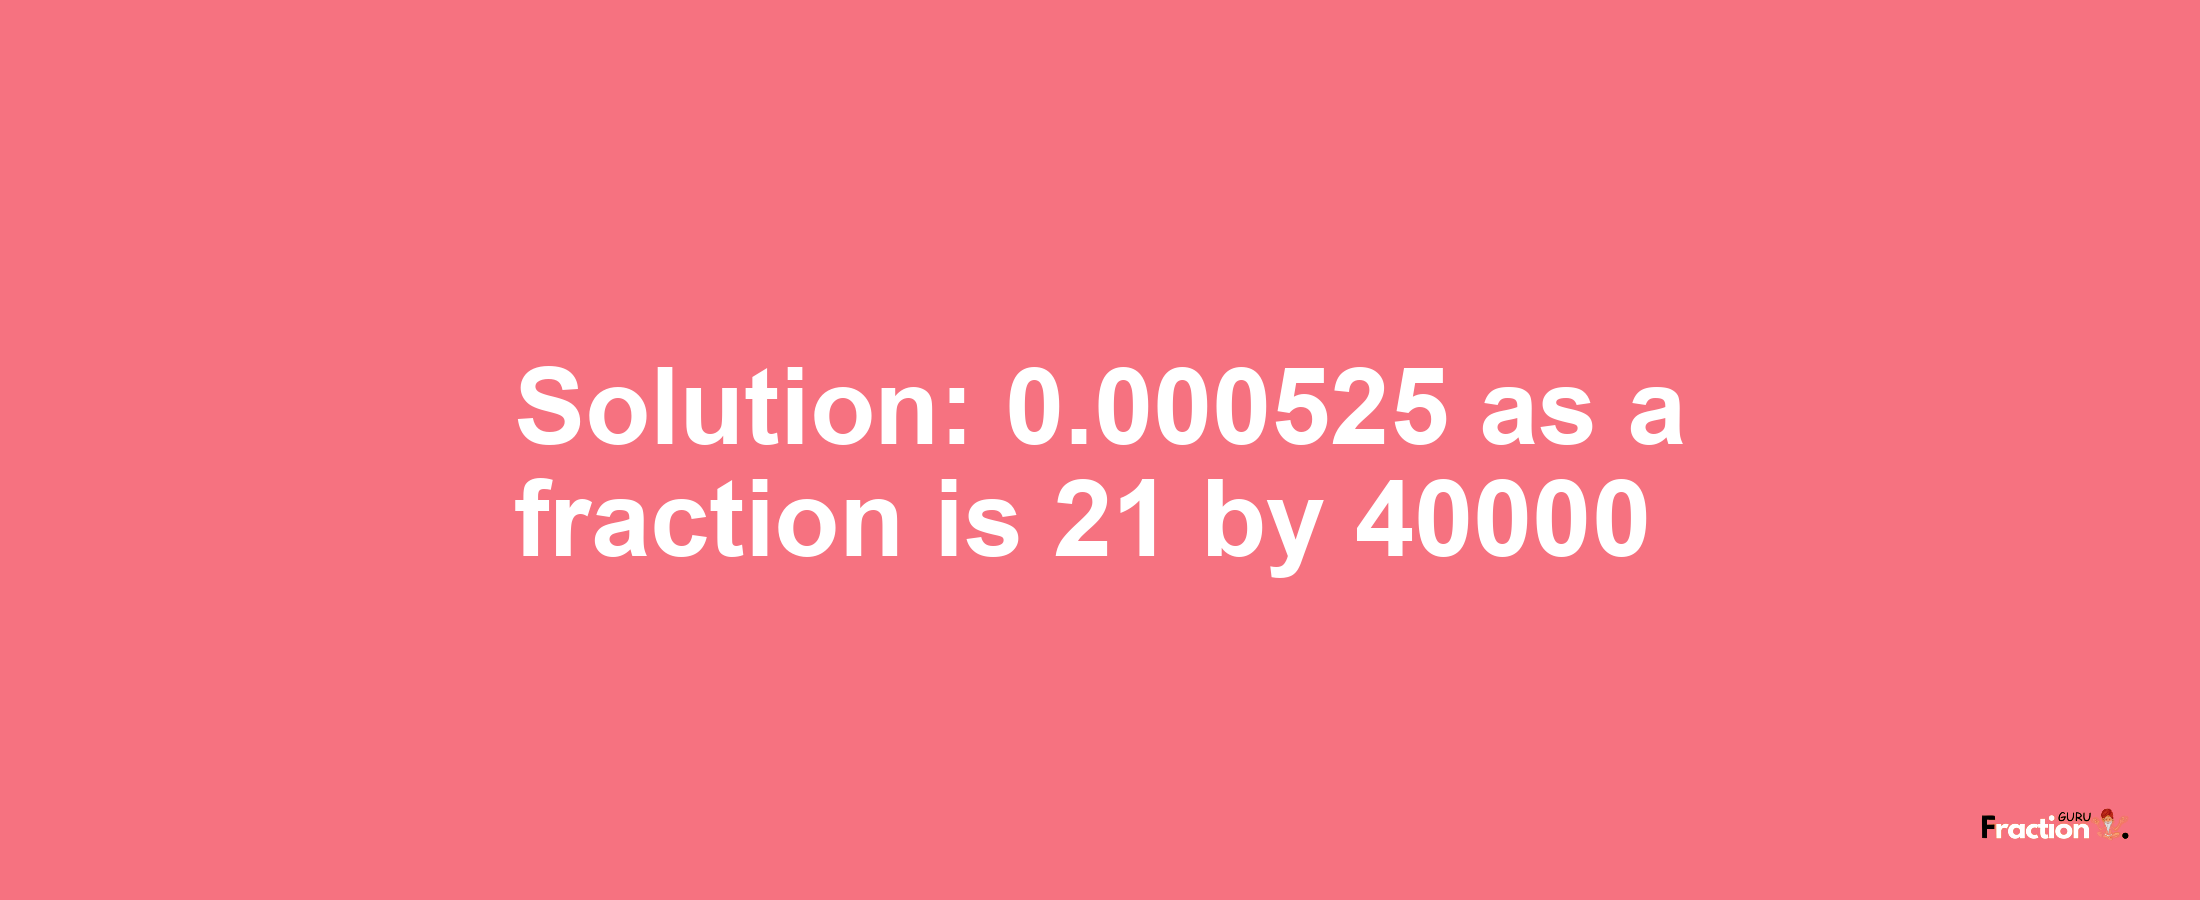 Solution:0.000525 as a fraction is 21/40000